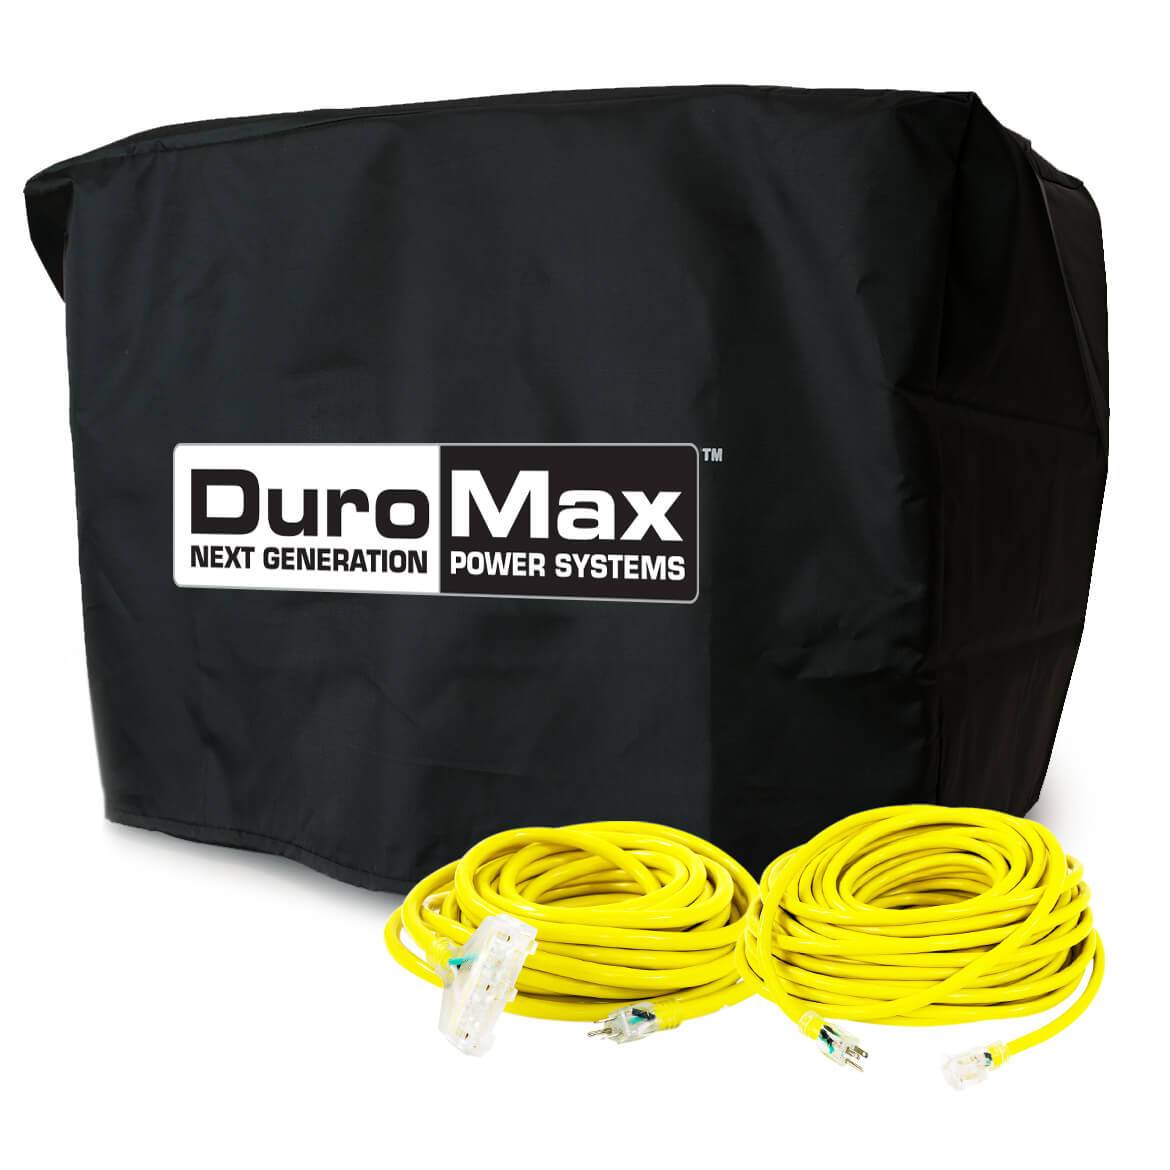 DuroMax XP10000-DXKIT 100-Foot Extension Power Cord Kit w/ Generator Cover